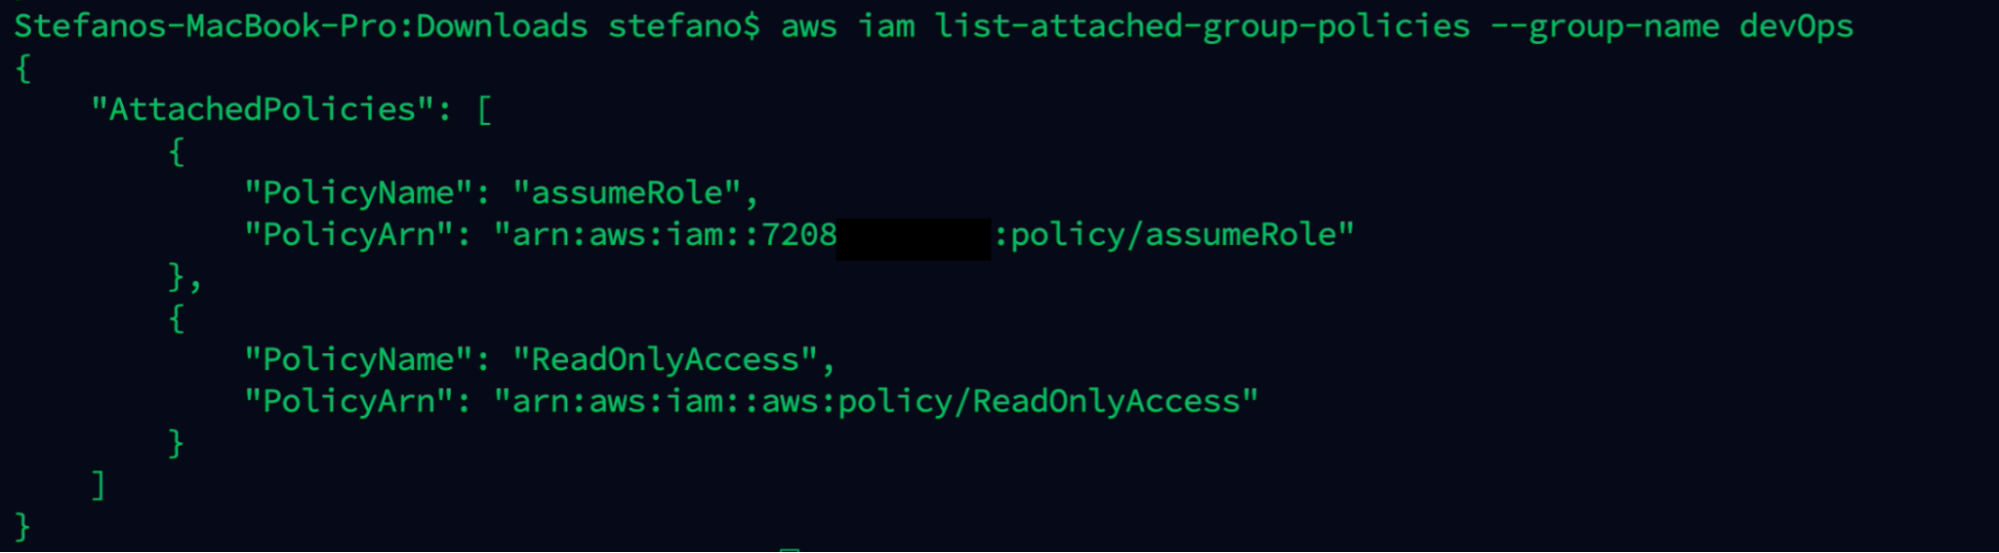 Output AWS command list attached group policies